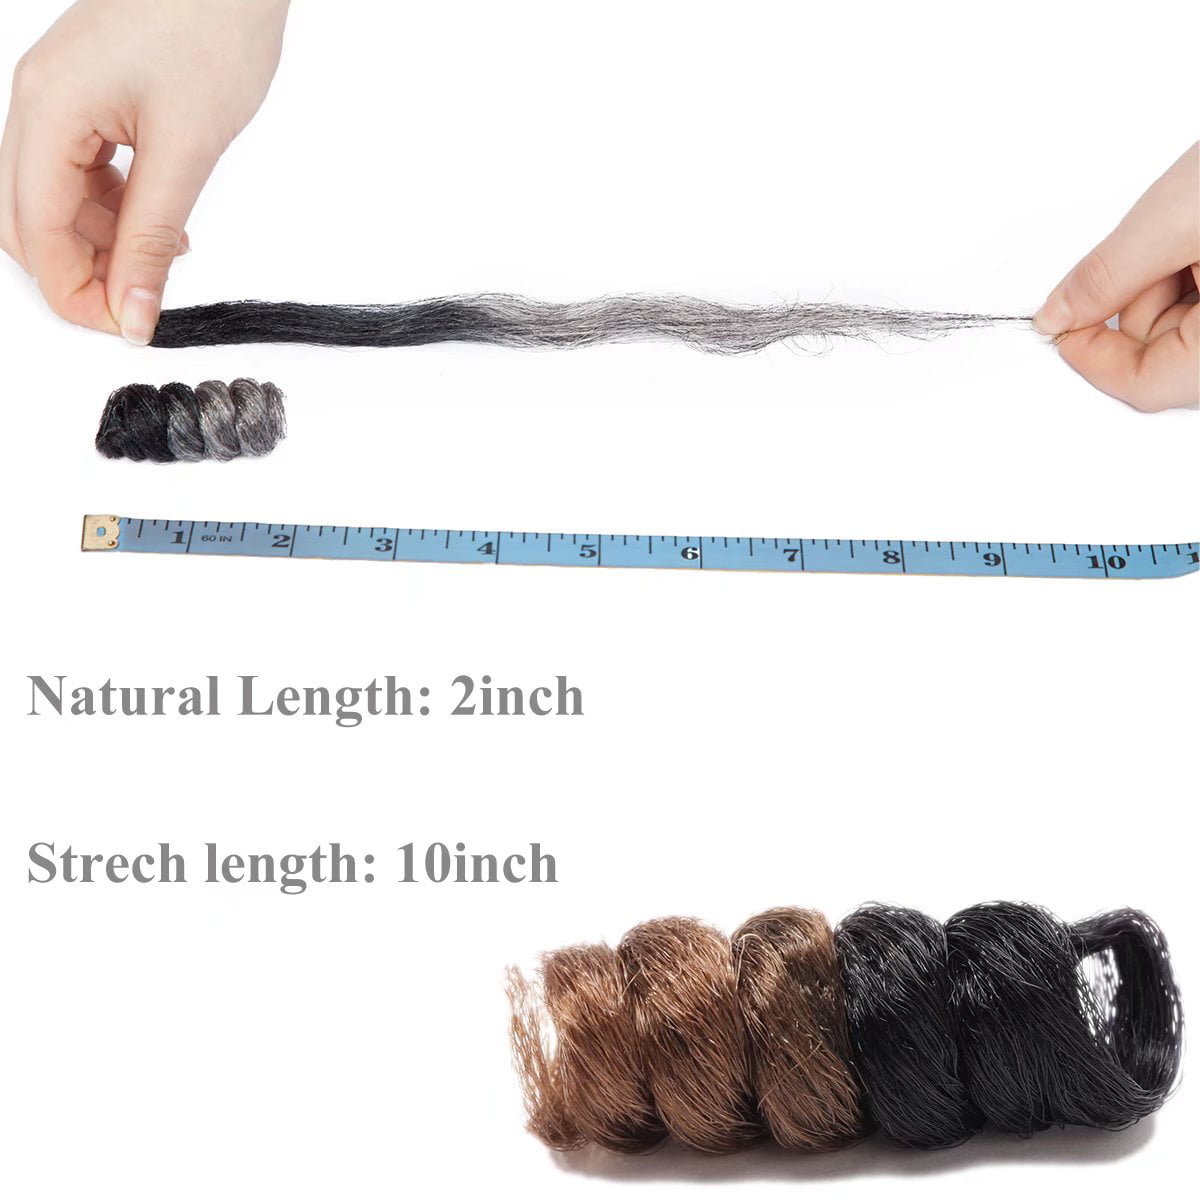 Benehair Toni Curl Crochet Braids Hair Extensions Short Curly Hair For  Black Women Ombre Twist Braiding 10 inch 100 Roots 